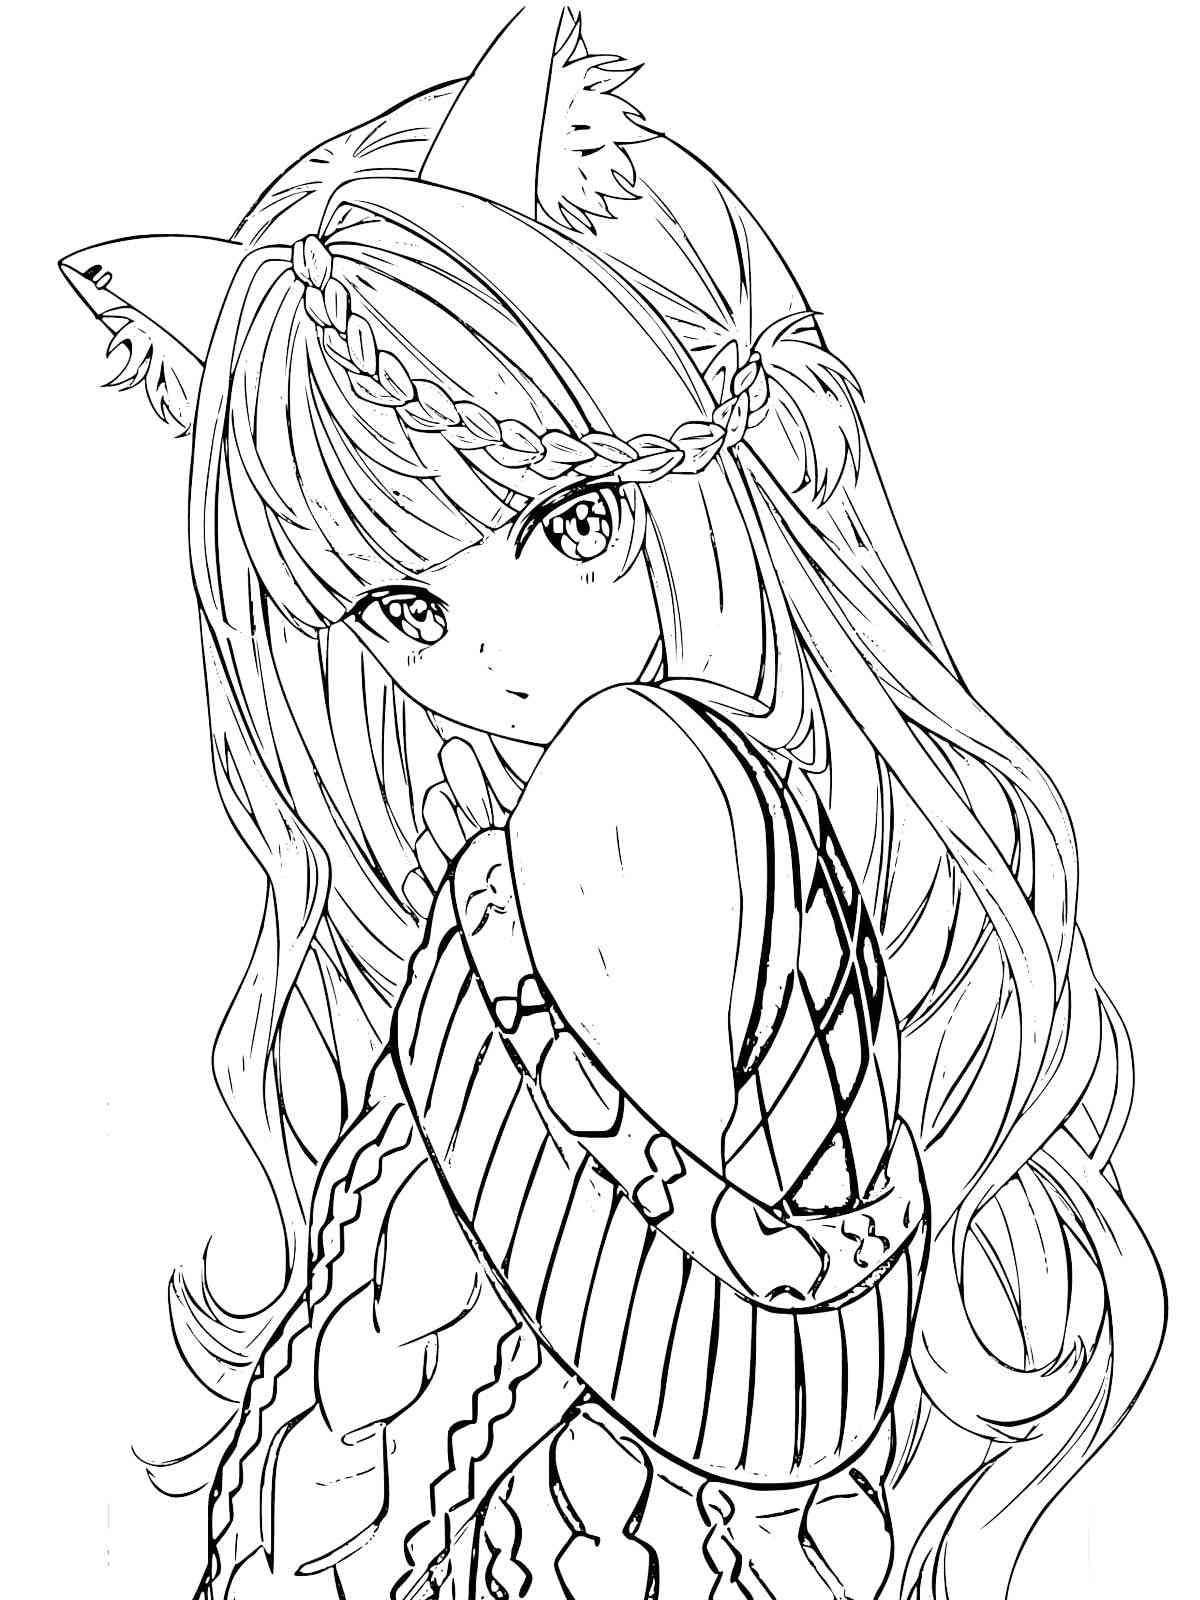 Shy Anime Girl coloring page